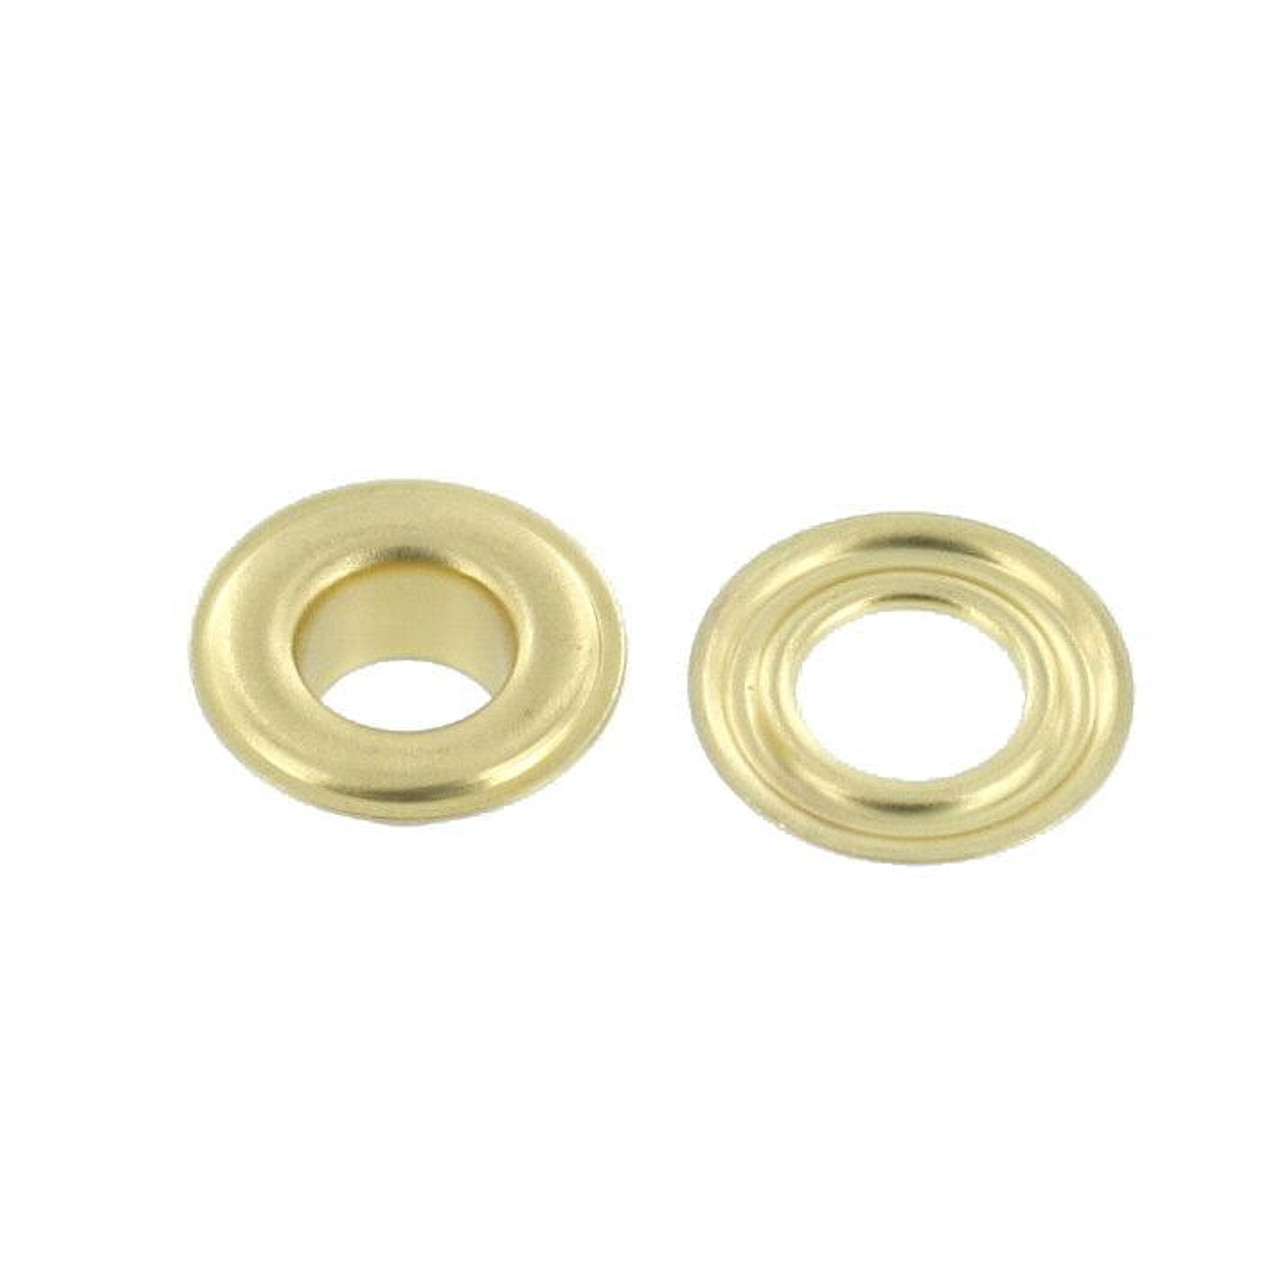 General Tools 1260-4 1/2-Inch Solid Brass Grommet Kit